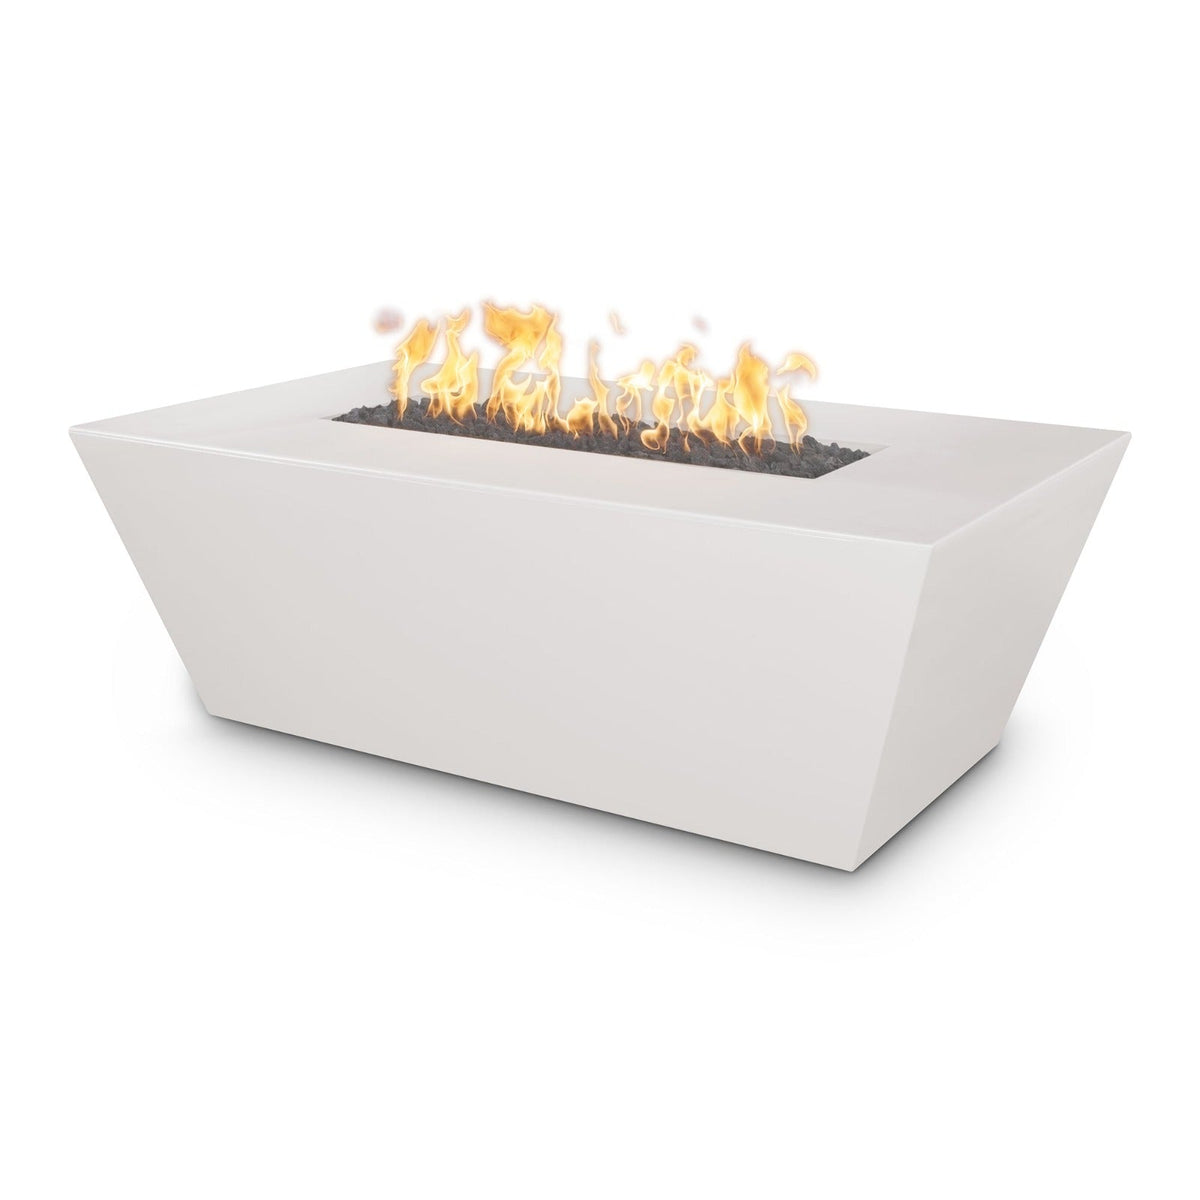 The Outdoor Plus Fire Features Limestone (-LIM) / Match Lit Ignition / Liquid Propane The Outdoor Plus 60&quot; Rectangular Angelus Fire Pit in Solid Concrete Finishes - GFRC Concrete / OPT-AGLGF60, OPT-AGLGF60FSML, OPT-AGLGF60FSEN, OPT-AGLGF60E12V, OPT-AGLGF60EKIT